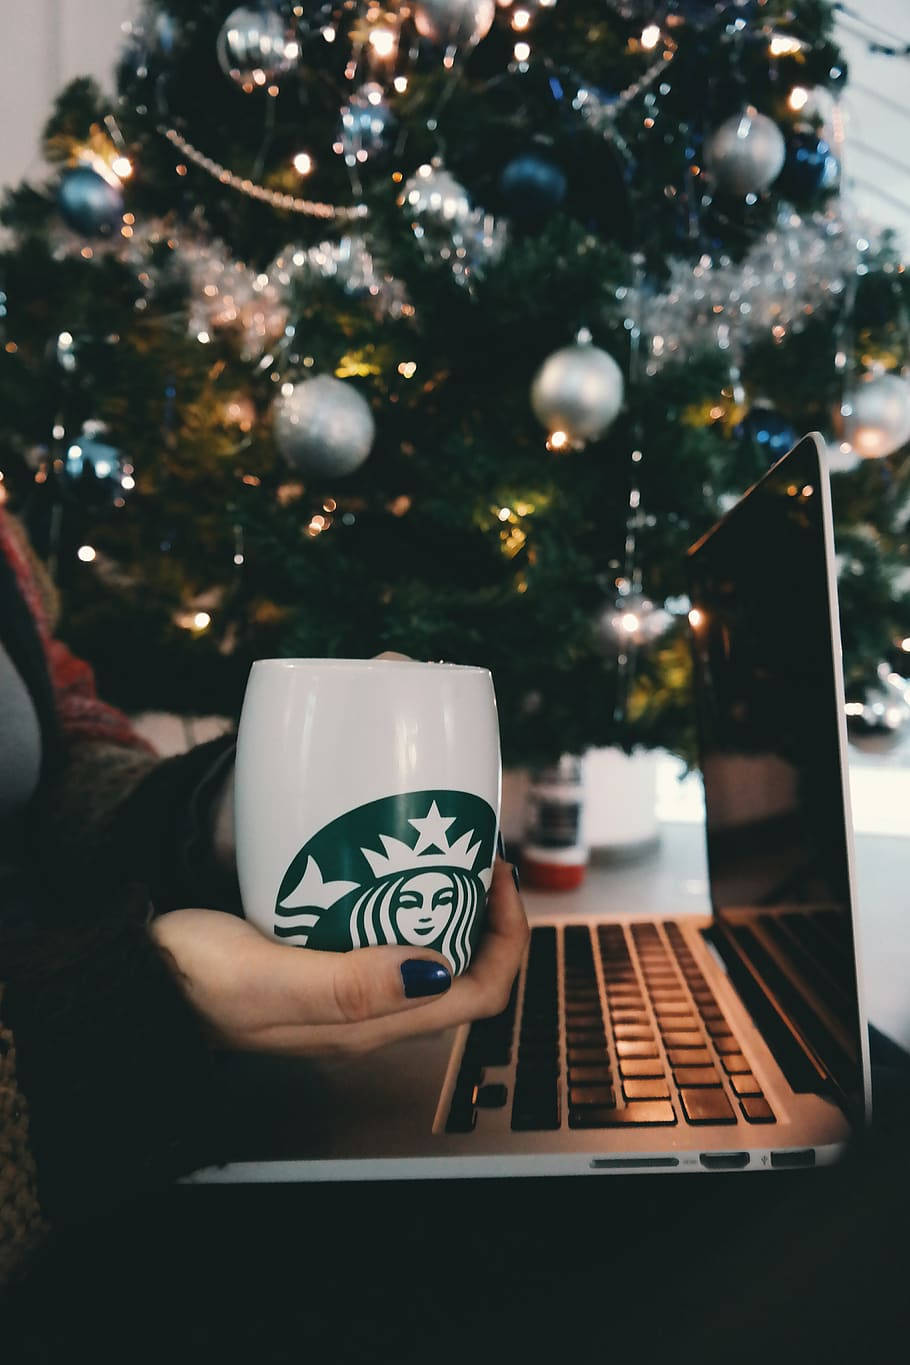 Coffee And Laptop Work On Christmas Wallpaper